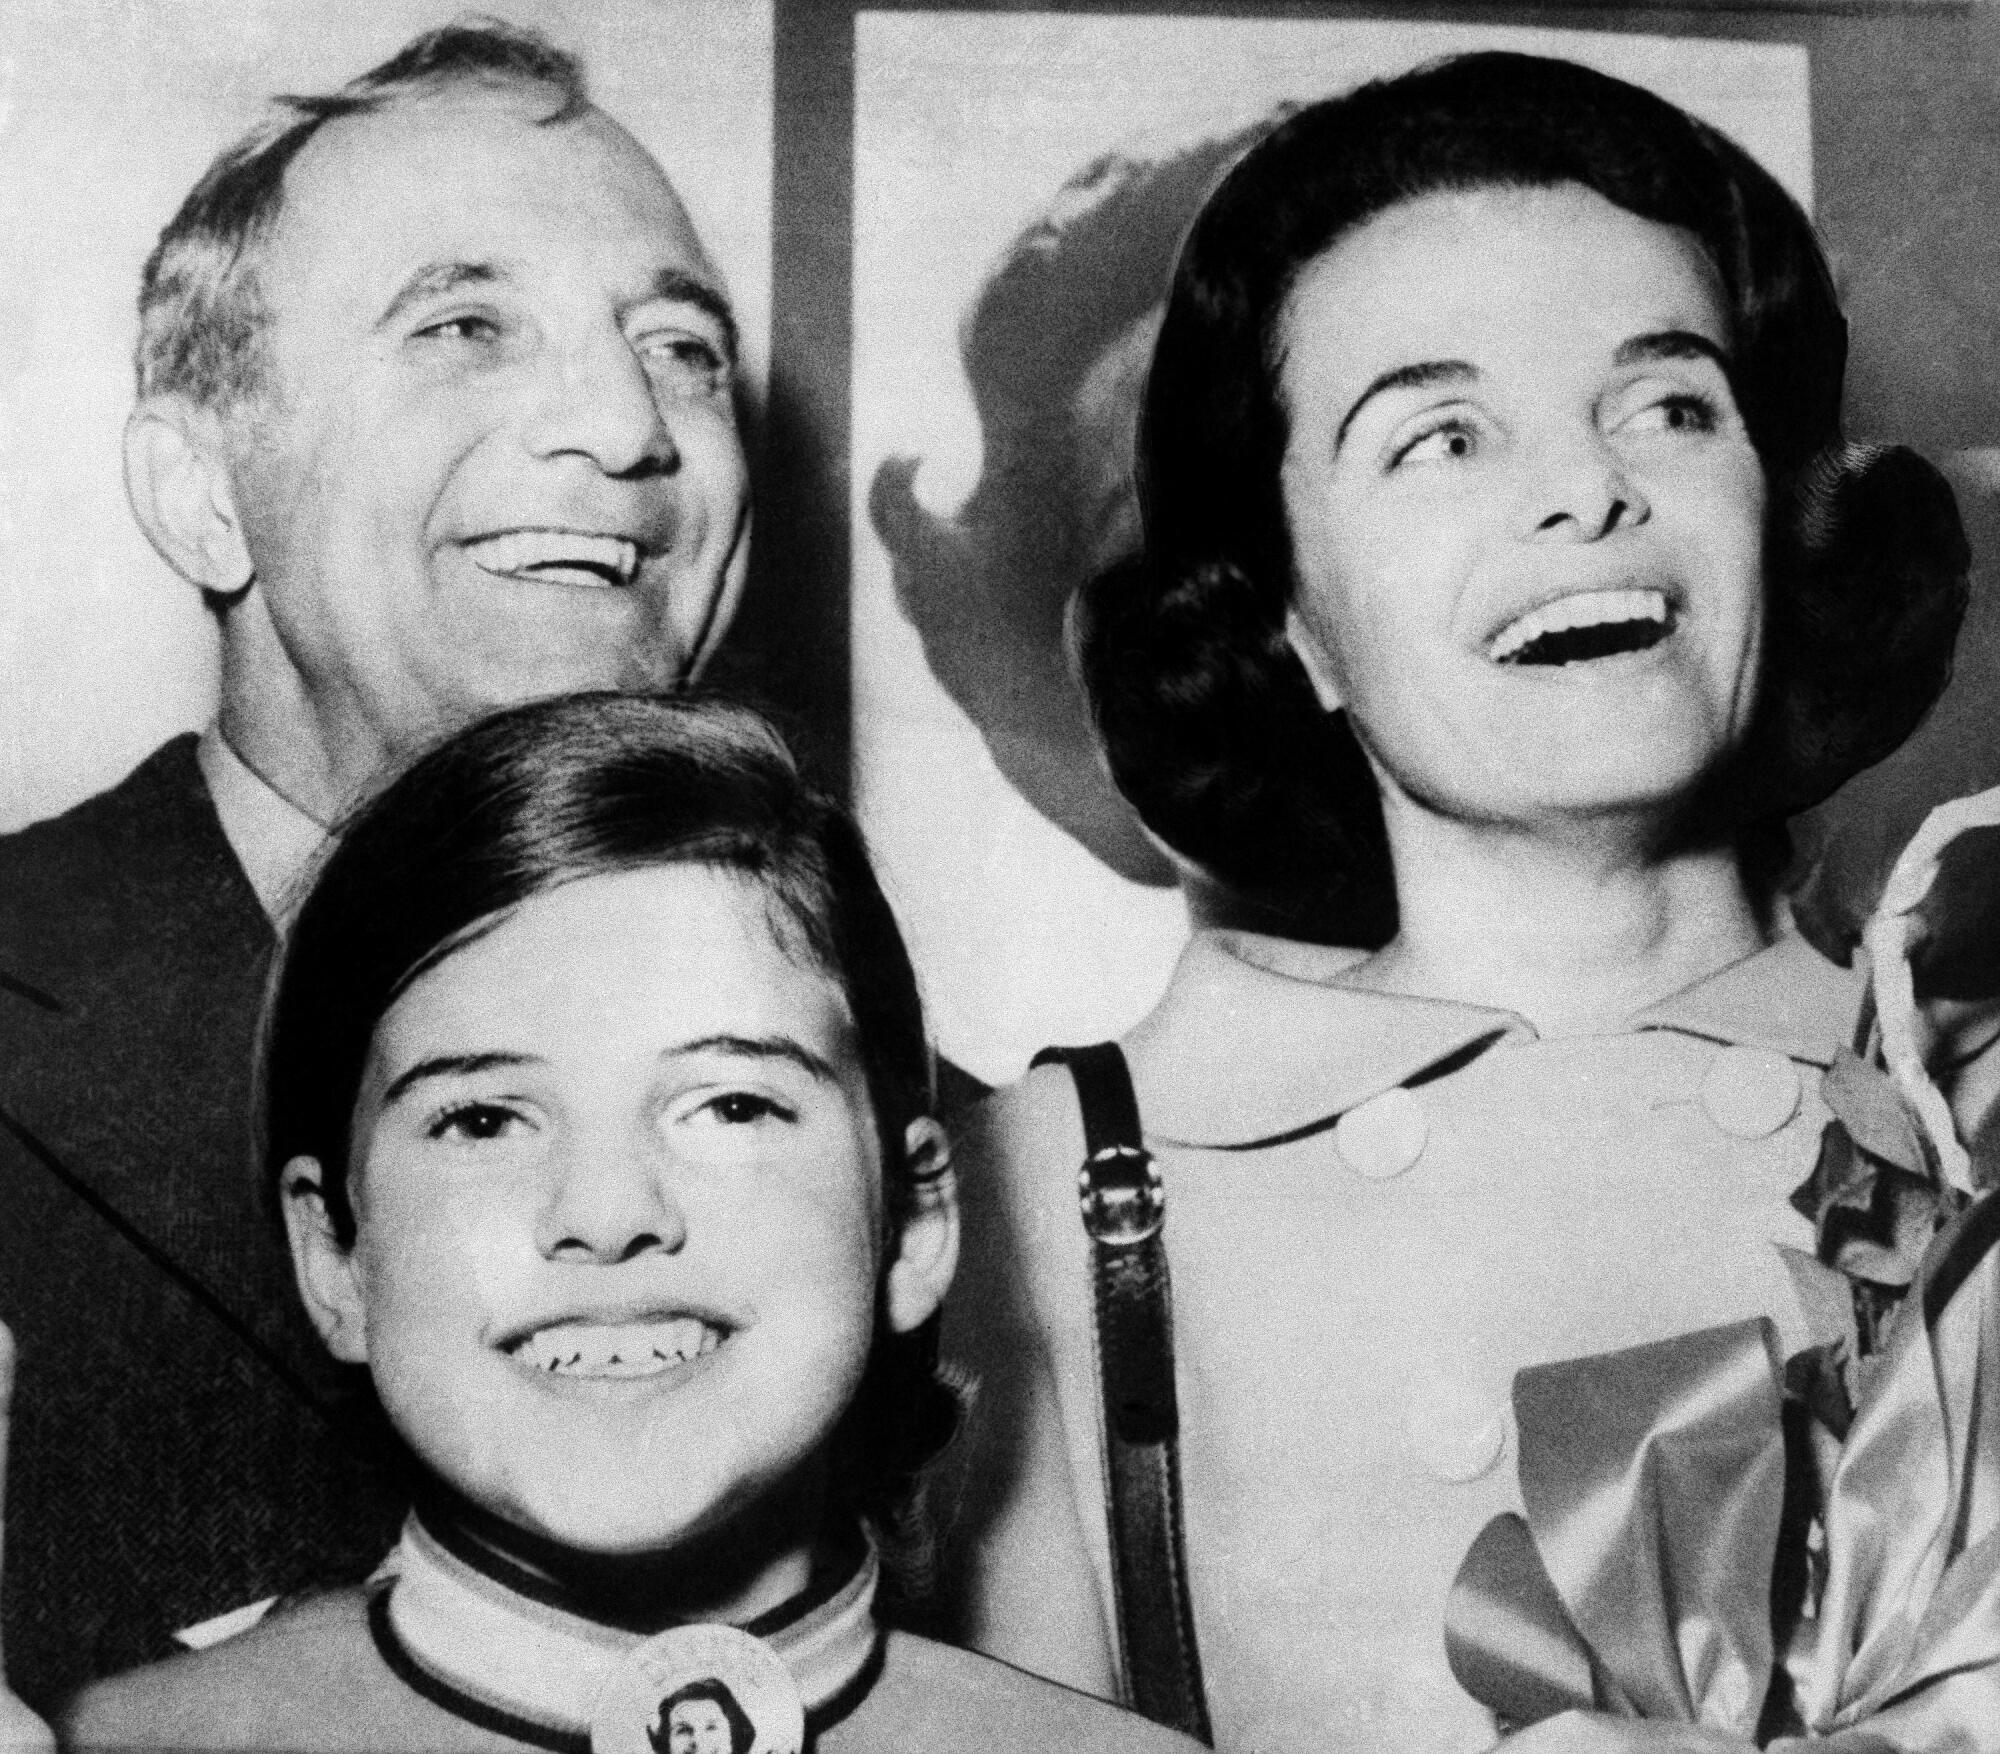 A black-and-white portrait of Dianne Feinstein with her second husband, Dr. Bertram Feinstein, and her daughter, Katherine.